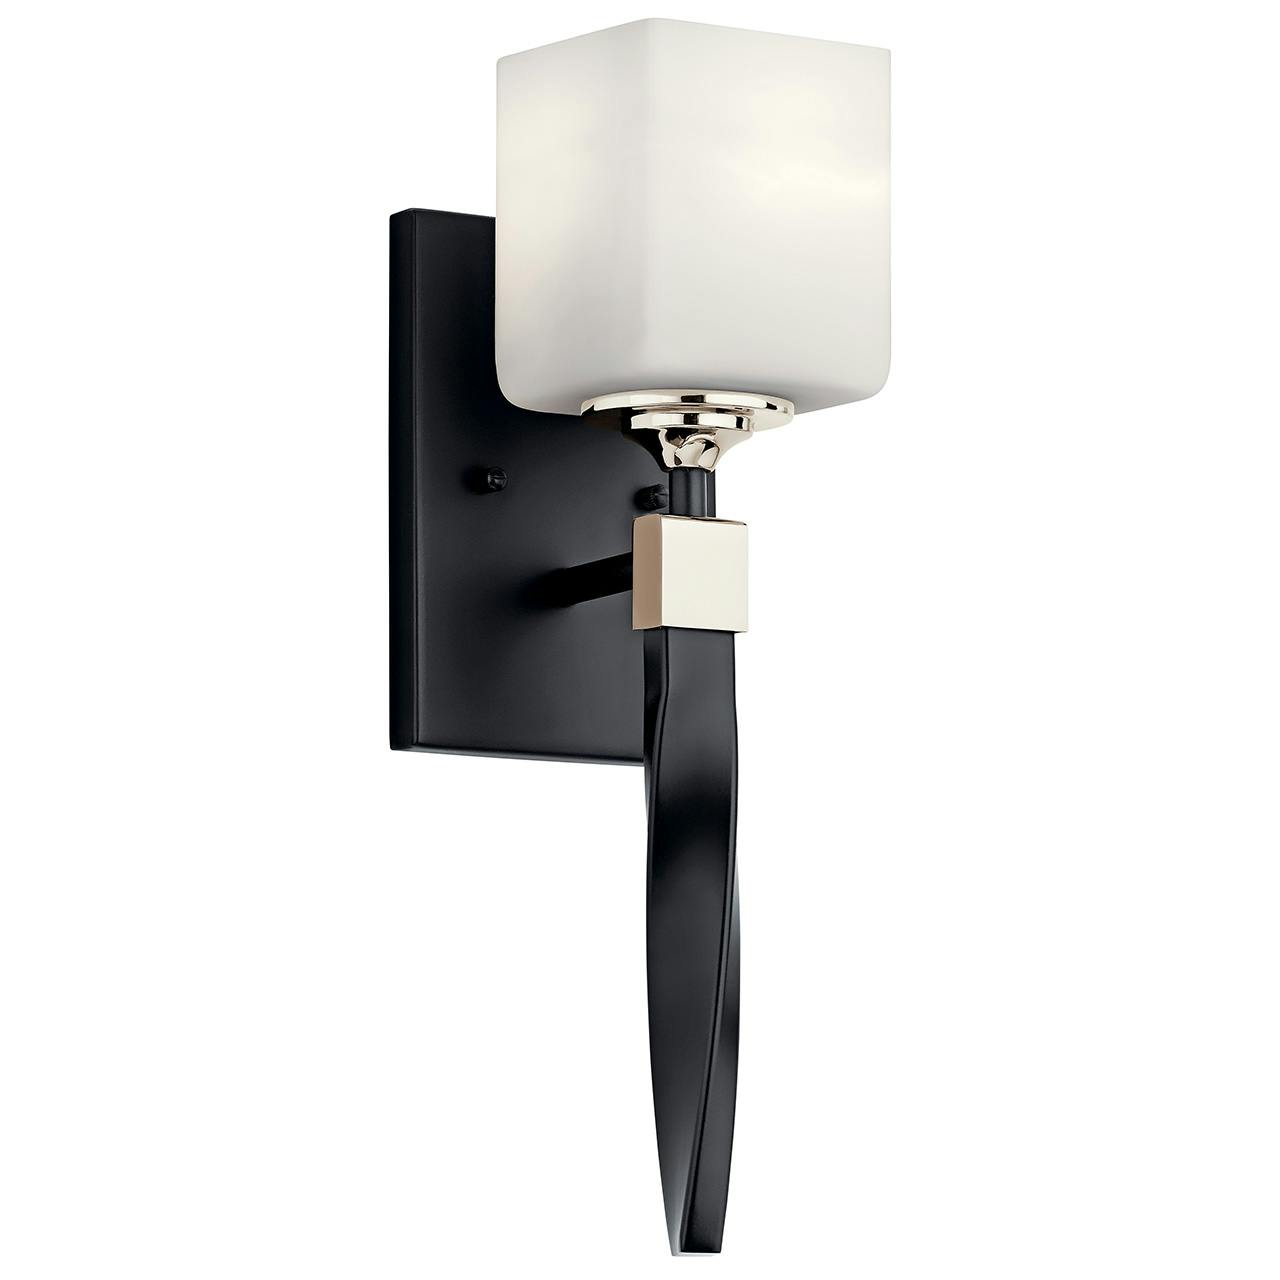 Marette™ 5" 1 Light Wall Sconce Black on a white background